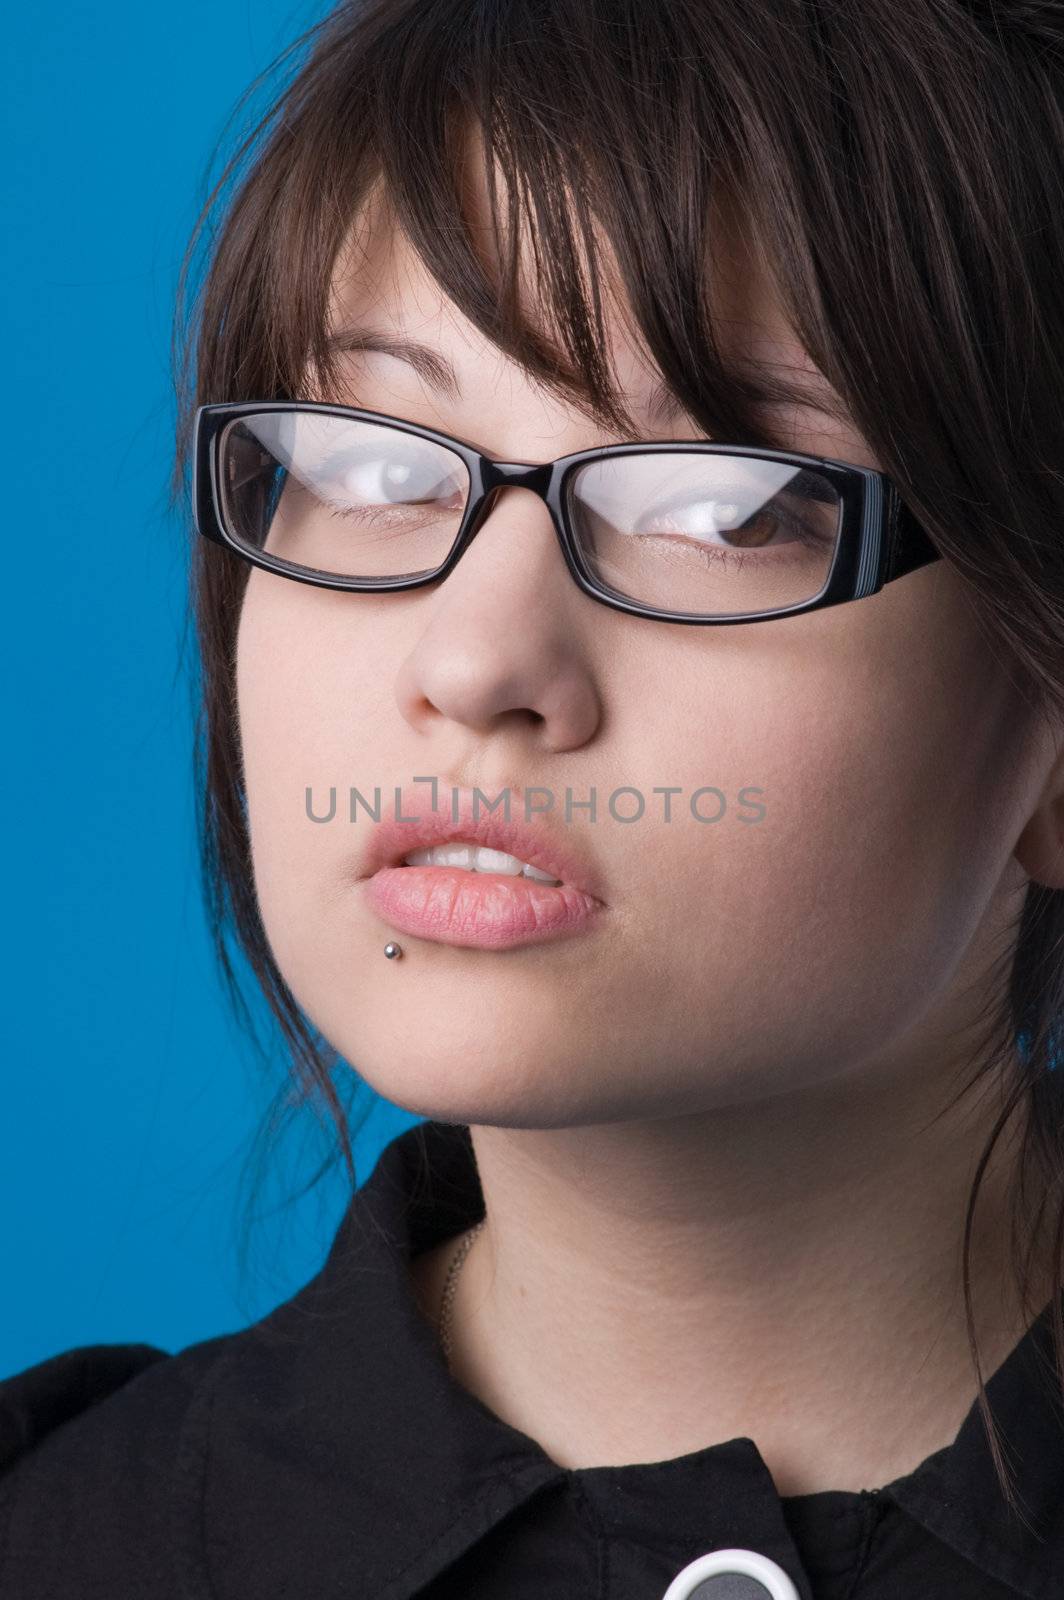 The girl on a dark blue background tries on glasses.